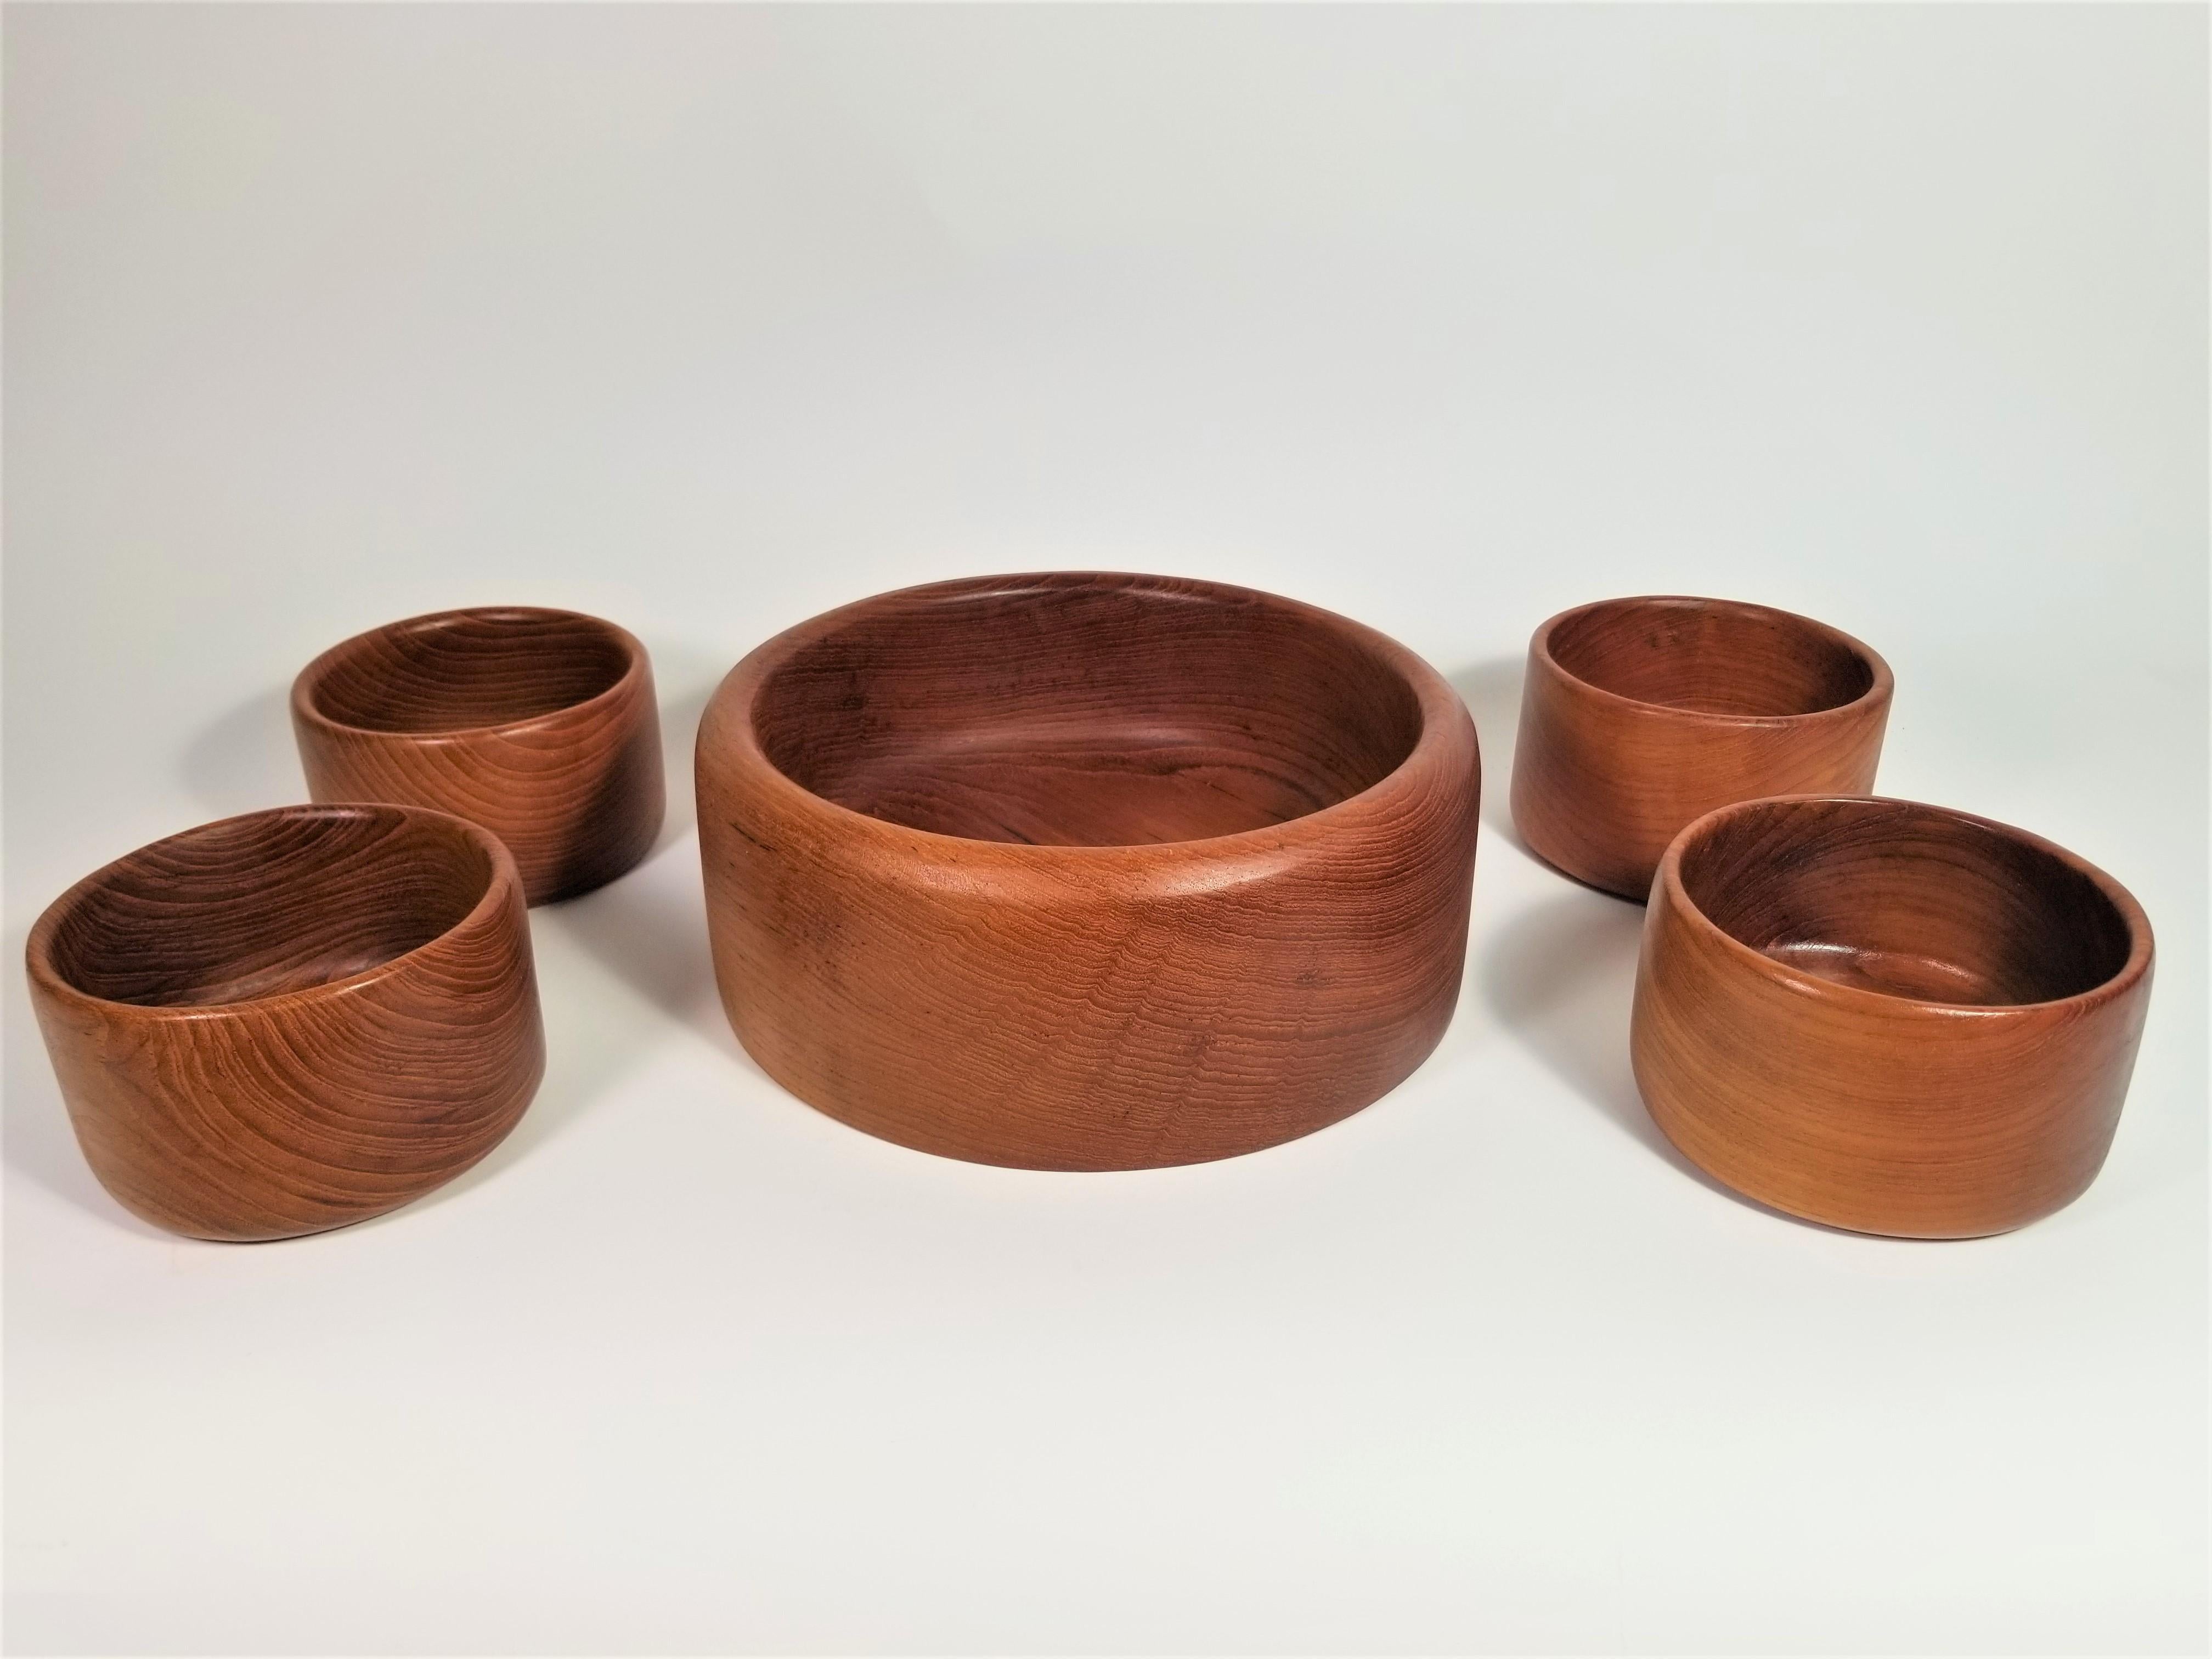 1960 midcentury hand-turned teak bowl set. 5 piece includes 1 large bowl and 4 small bowls. Excellent condition.
Measurements:
Large bowl height: 4.0 inches
Large bowl diameter: 10.25 inches
Small bowls height: 3.0 inches
Small bowls diameter: